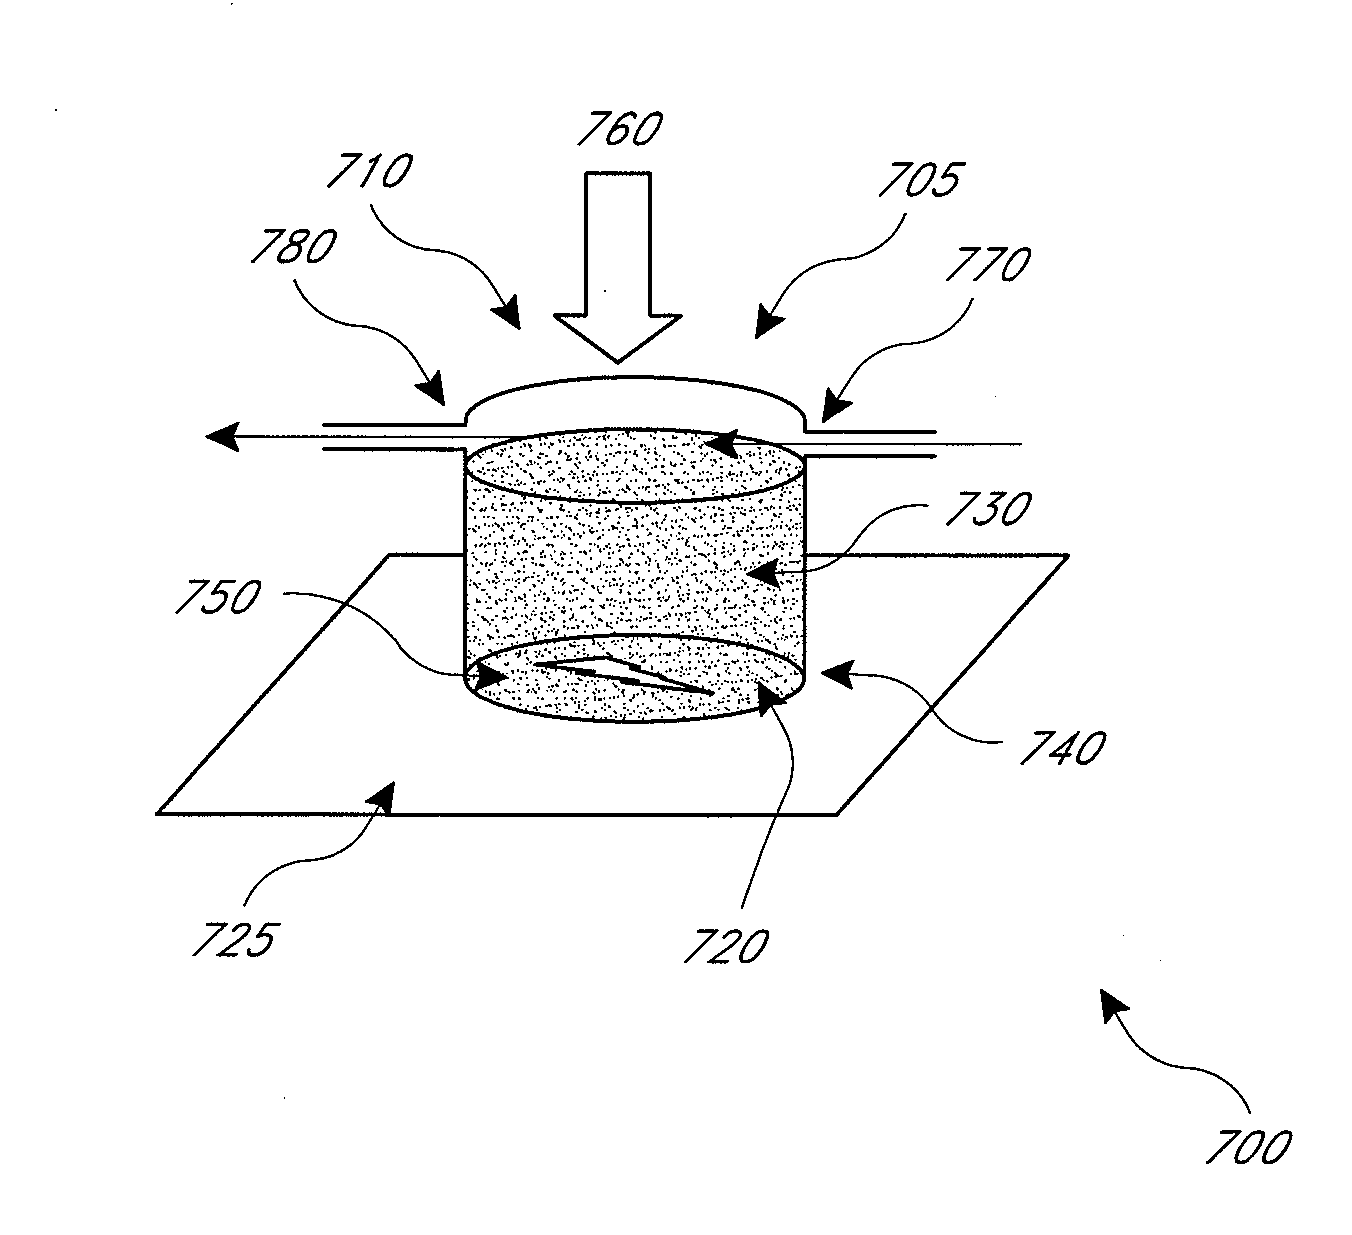 Hemostatic compositions, devices, and methods